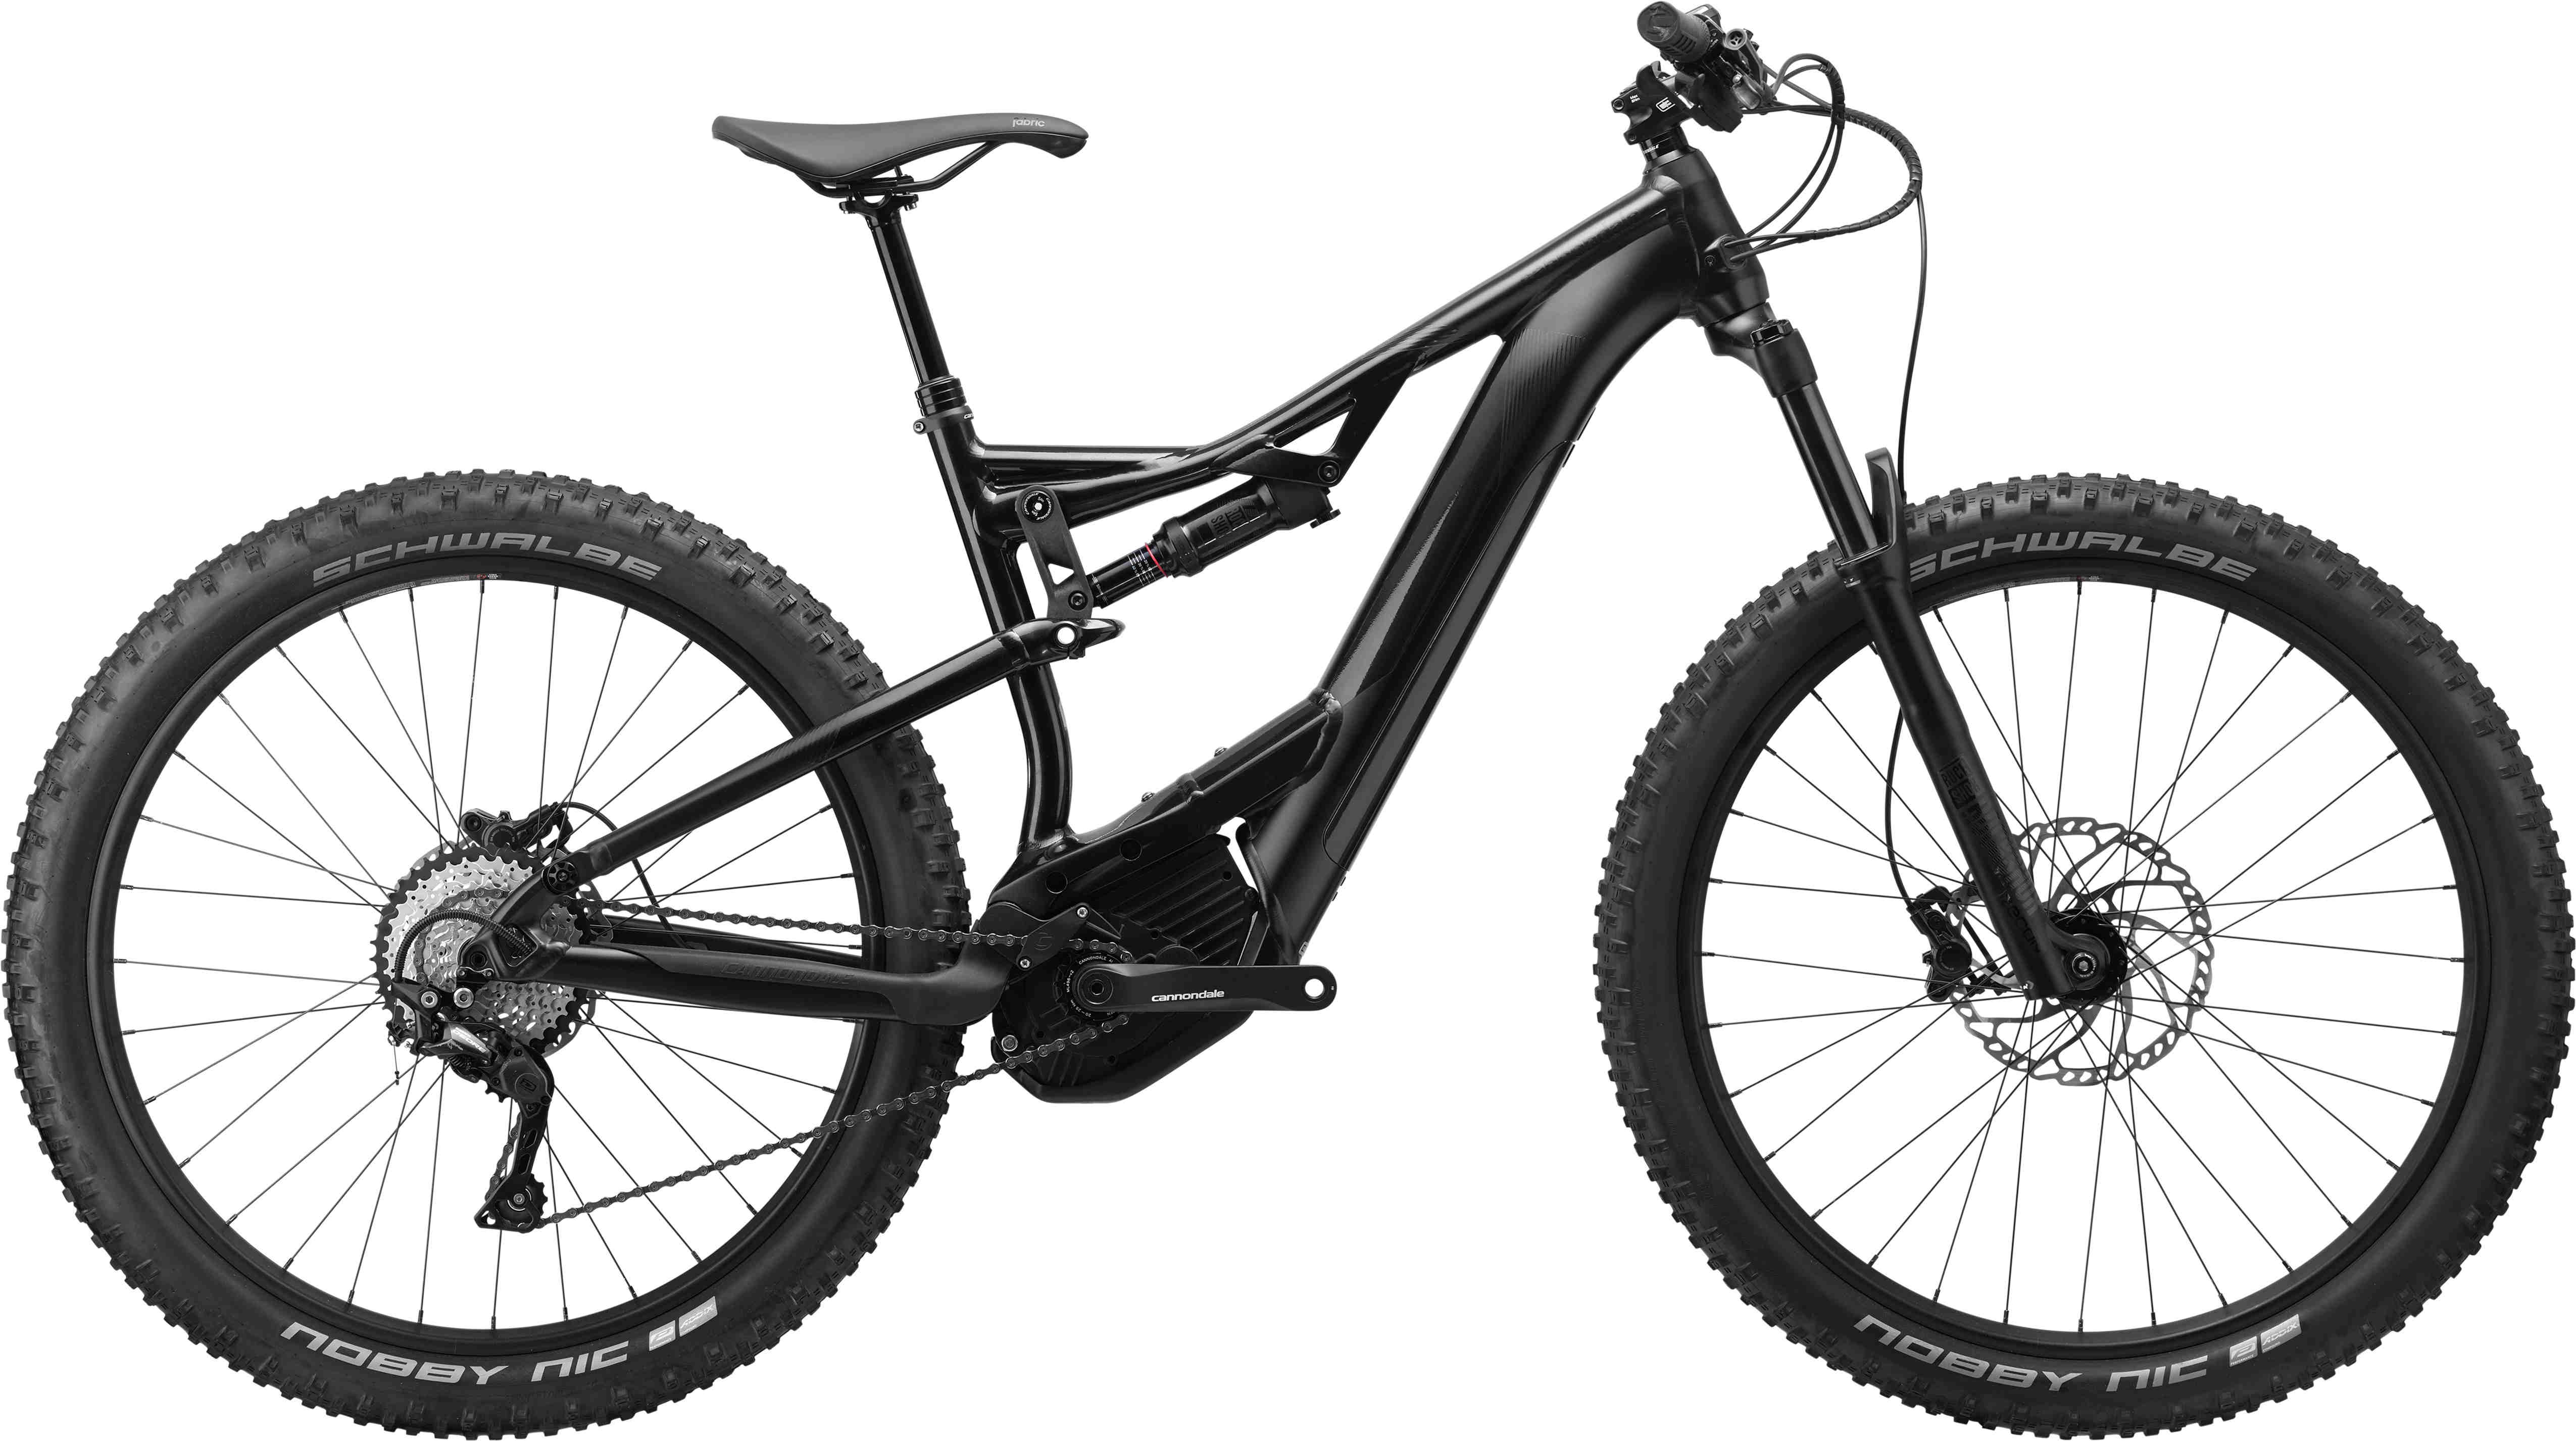 Cannondale Moterra NEO 2019